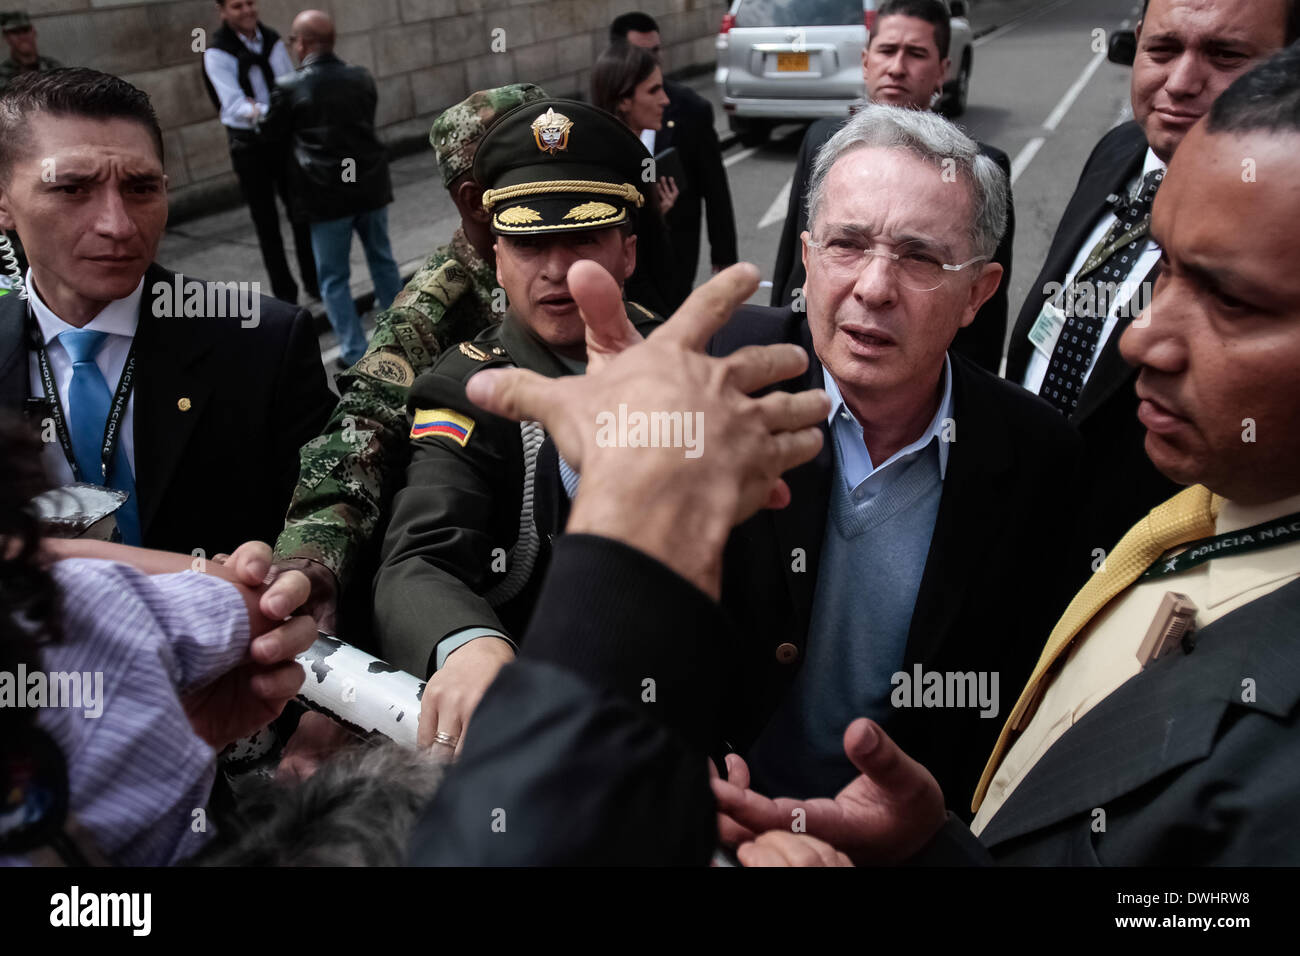 Bogota, Colombia. 9th Mar, 2014. Former Colombian President Alvaro Uribe (2nd R, front) arrives to cast his vote during the parliamentary elections in Bogota, capital of Colombia, on March 9, 2014. Credit:  Jhon Paz/Xinhua/Alamy Live News Stock Photo